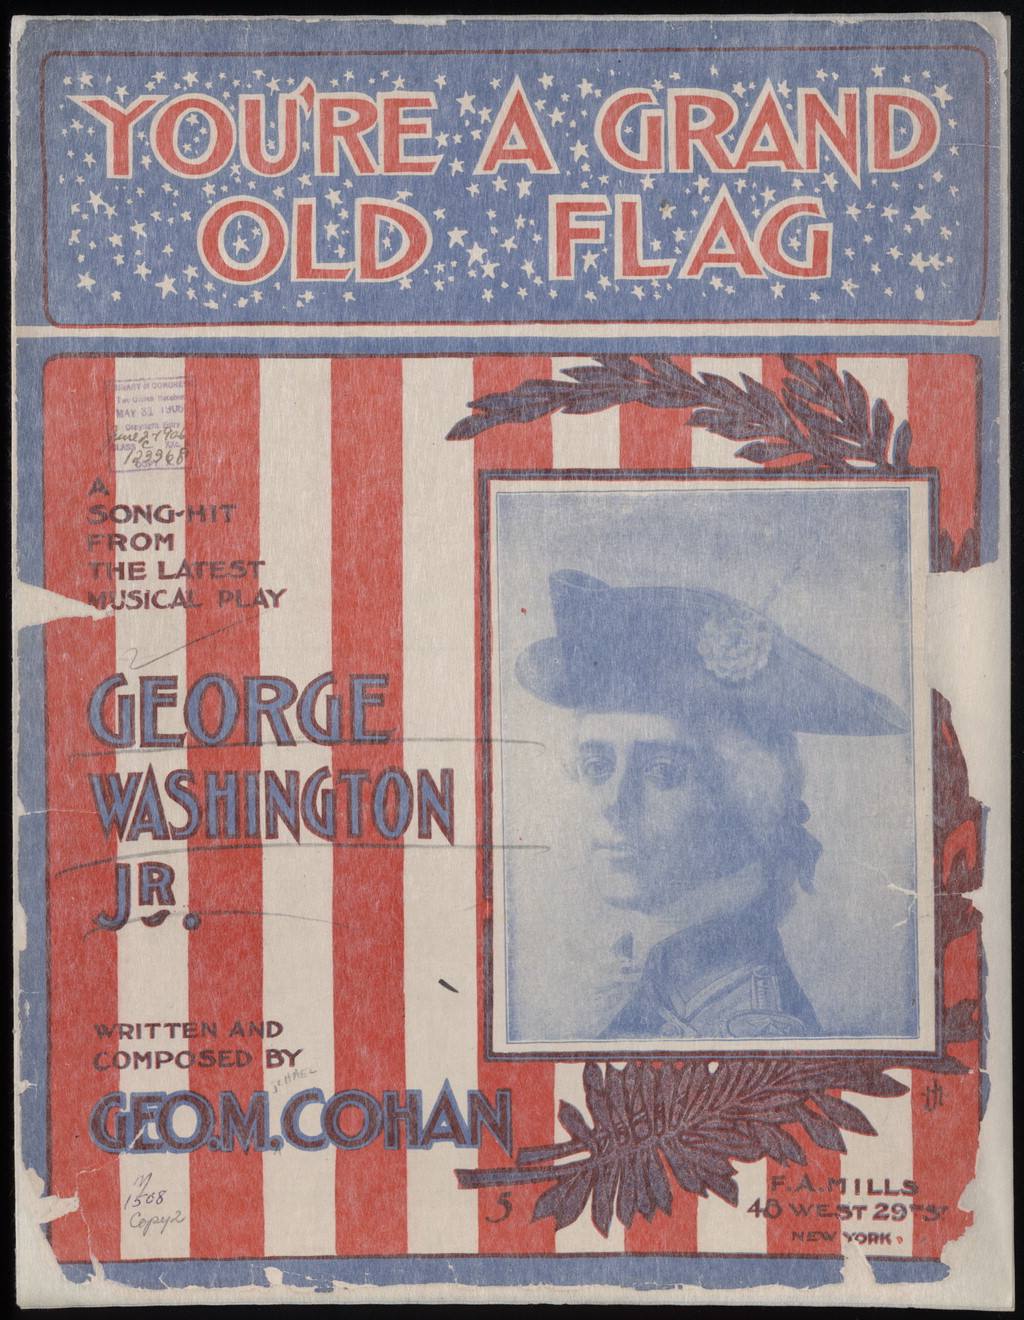 Cover of sheet music with stylized flag stripe and drawing of a revolutionary officer.